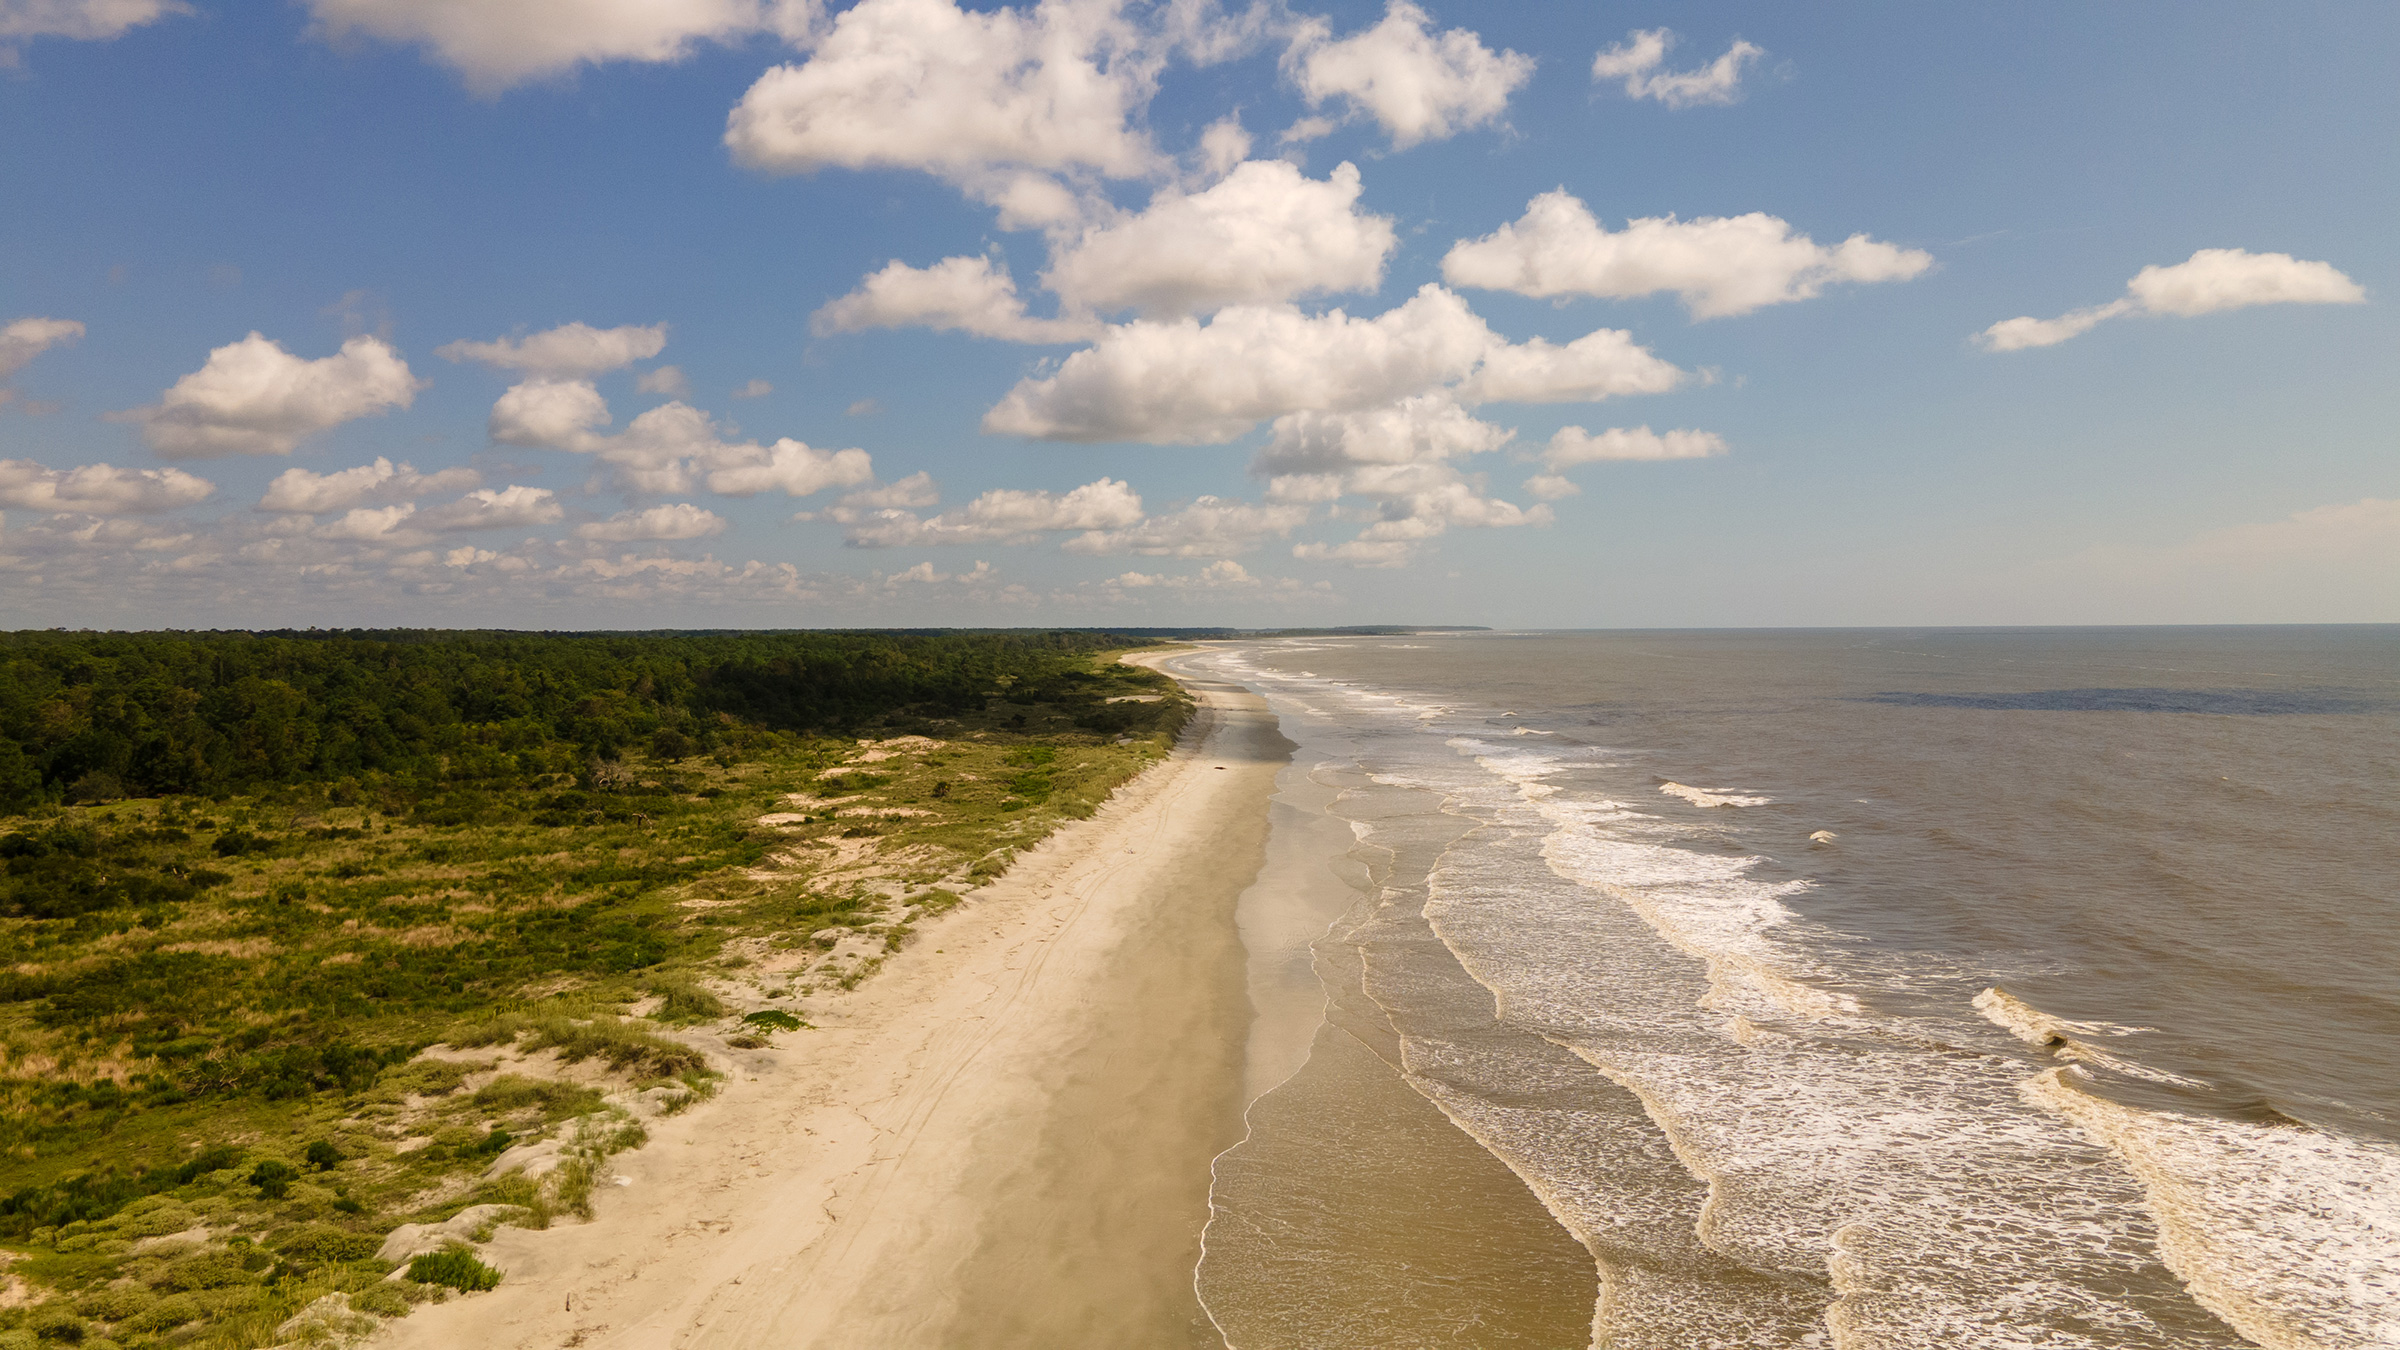 Aerial photo of Sapelo Island from Nanny Goat Beach (Lynsey Weatherspoon for TIME)